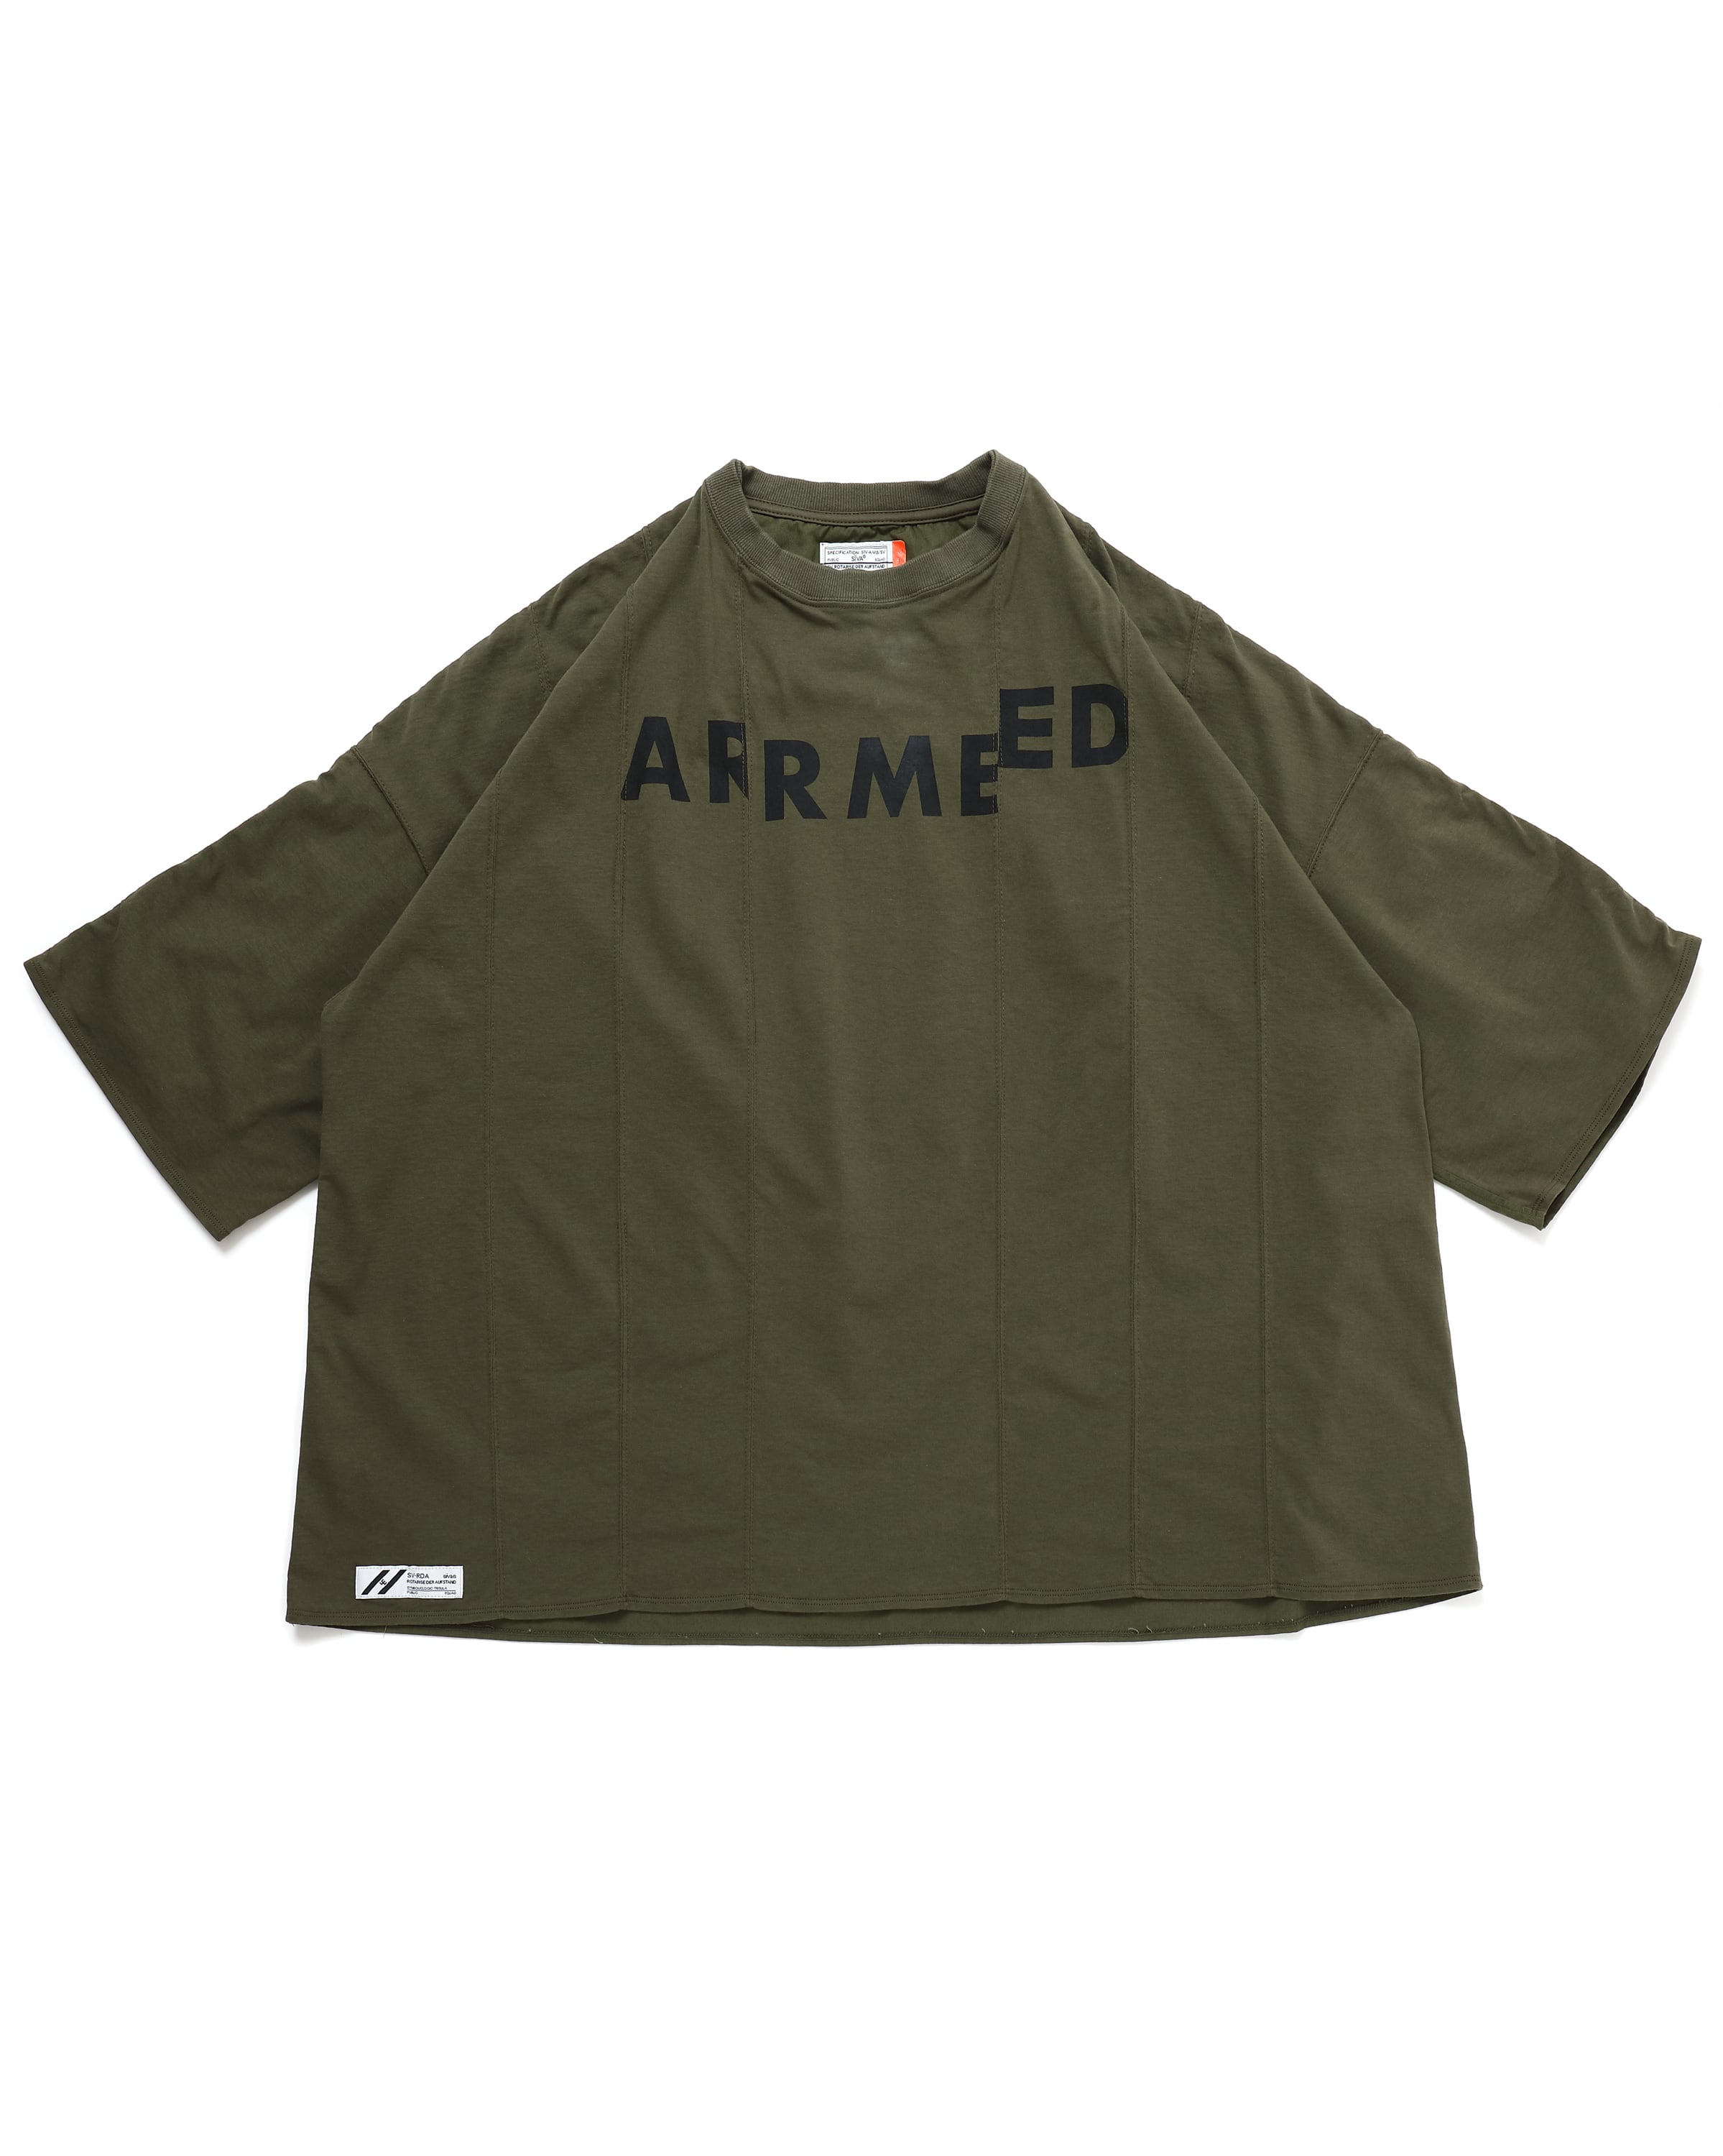 ARMED WIDE SHIRT